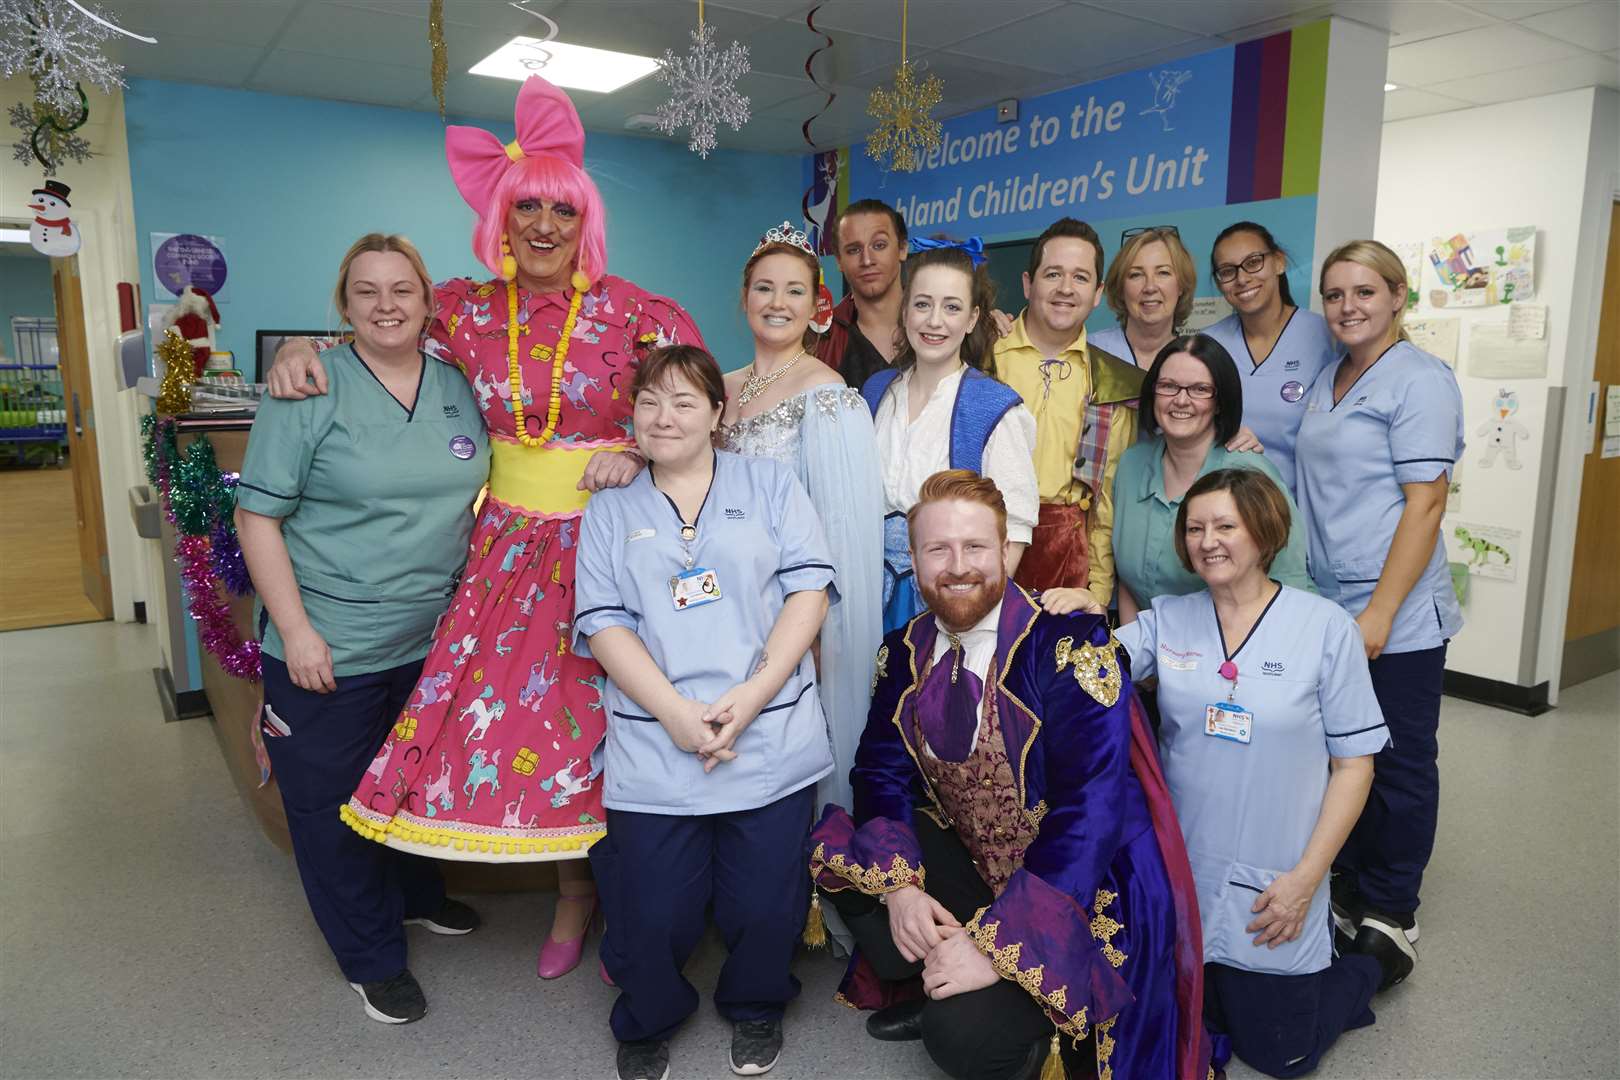 Posing for a happy pic – nurses, staff and panto stars are all smiles.